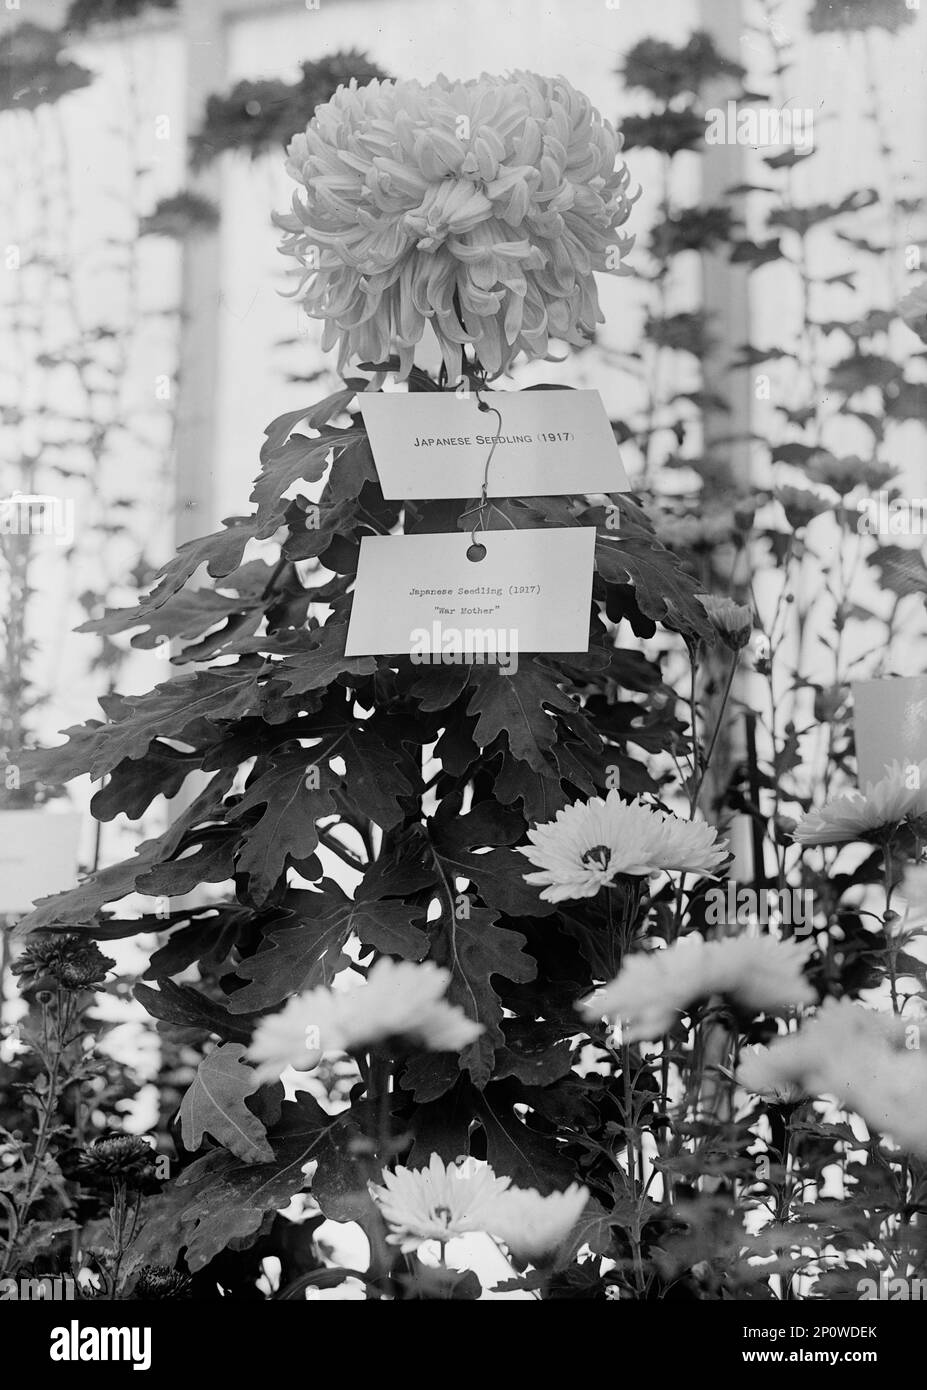 Department of Agriculture Chrysanthemum Show, 1917.  Japanese seedling (1917) &quot;War Mother&quot;. Stock Photo